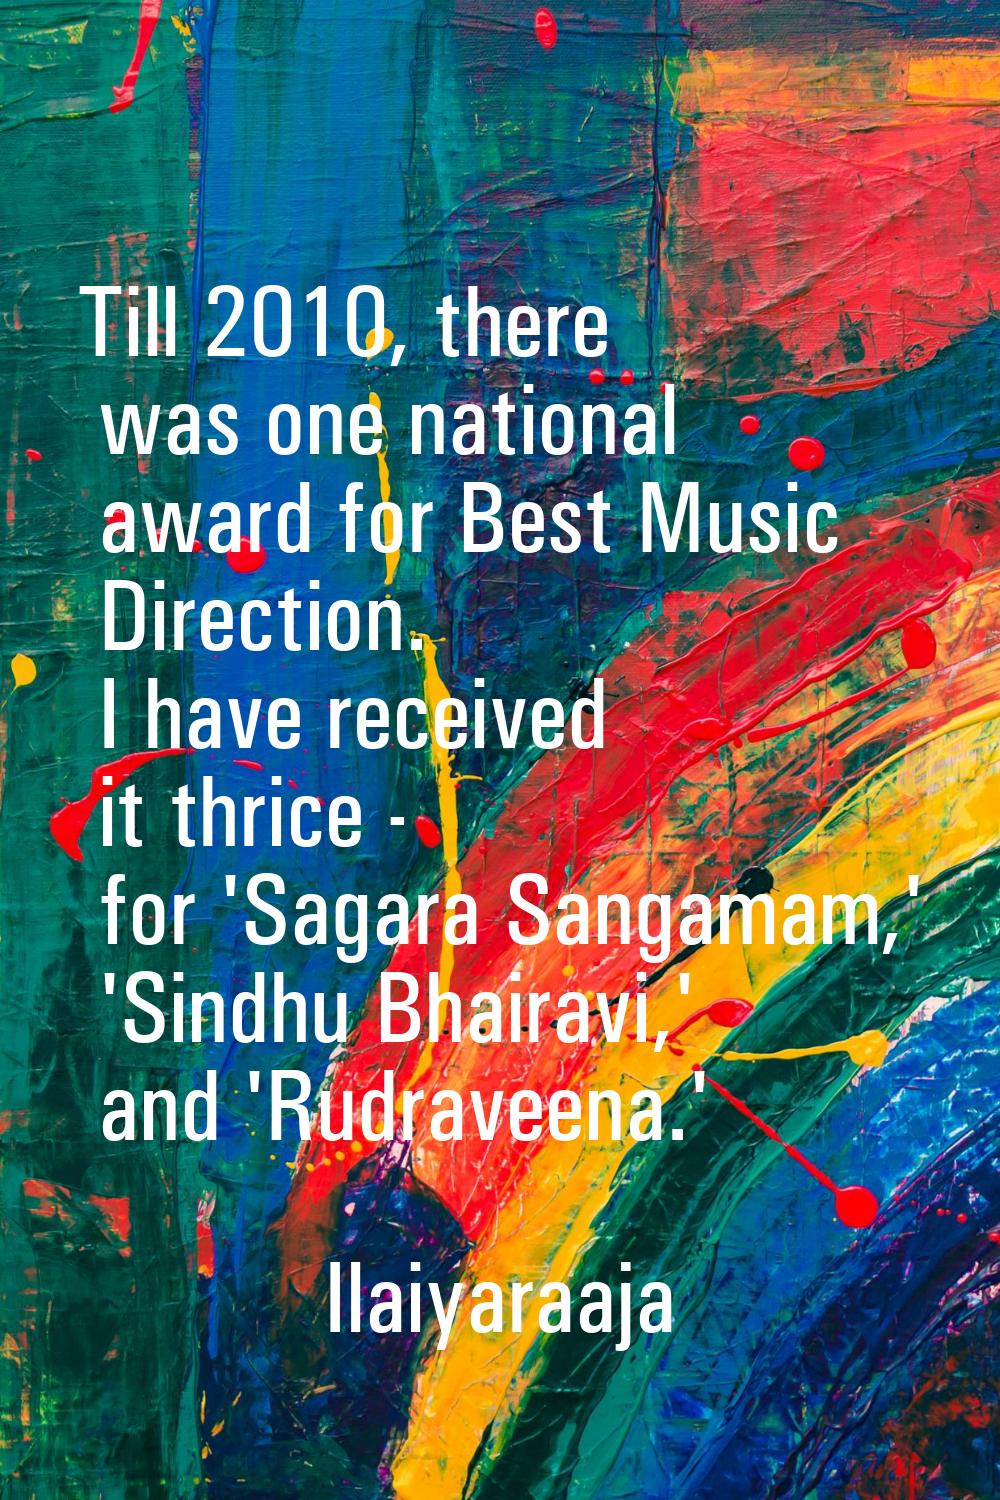 Till 2010, there was one national award for Best Music Direction. I have received it thrice - for '